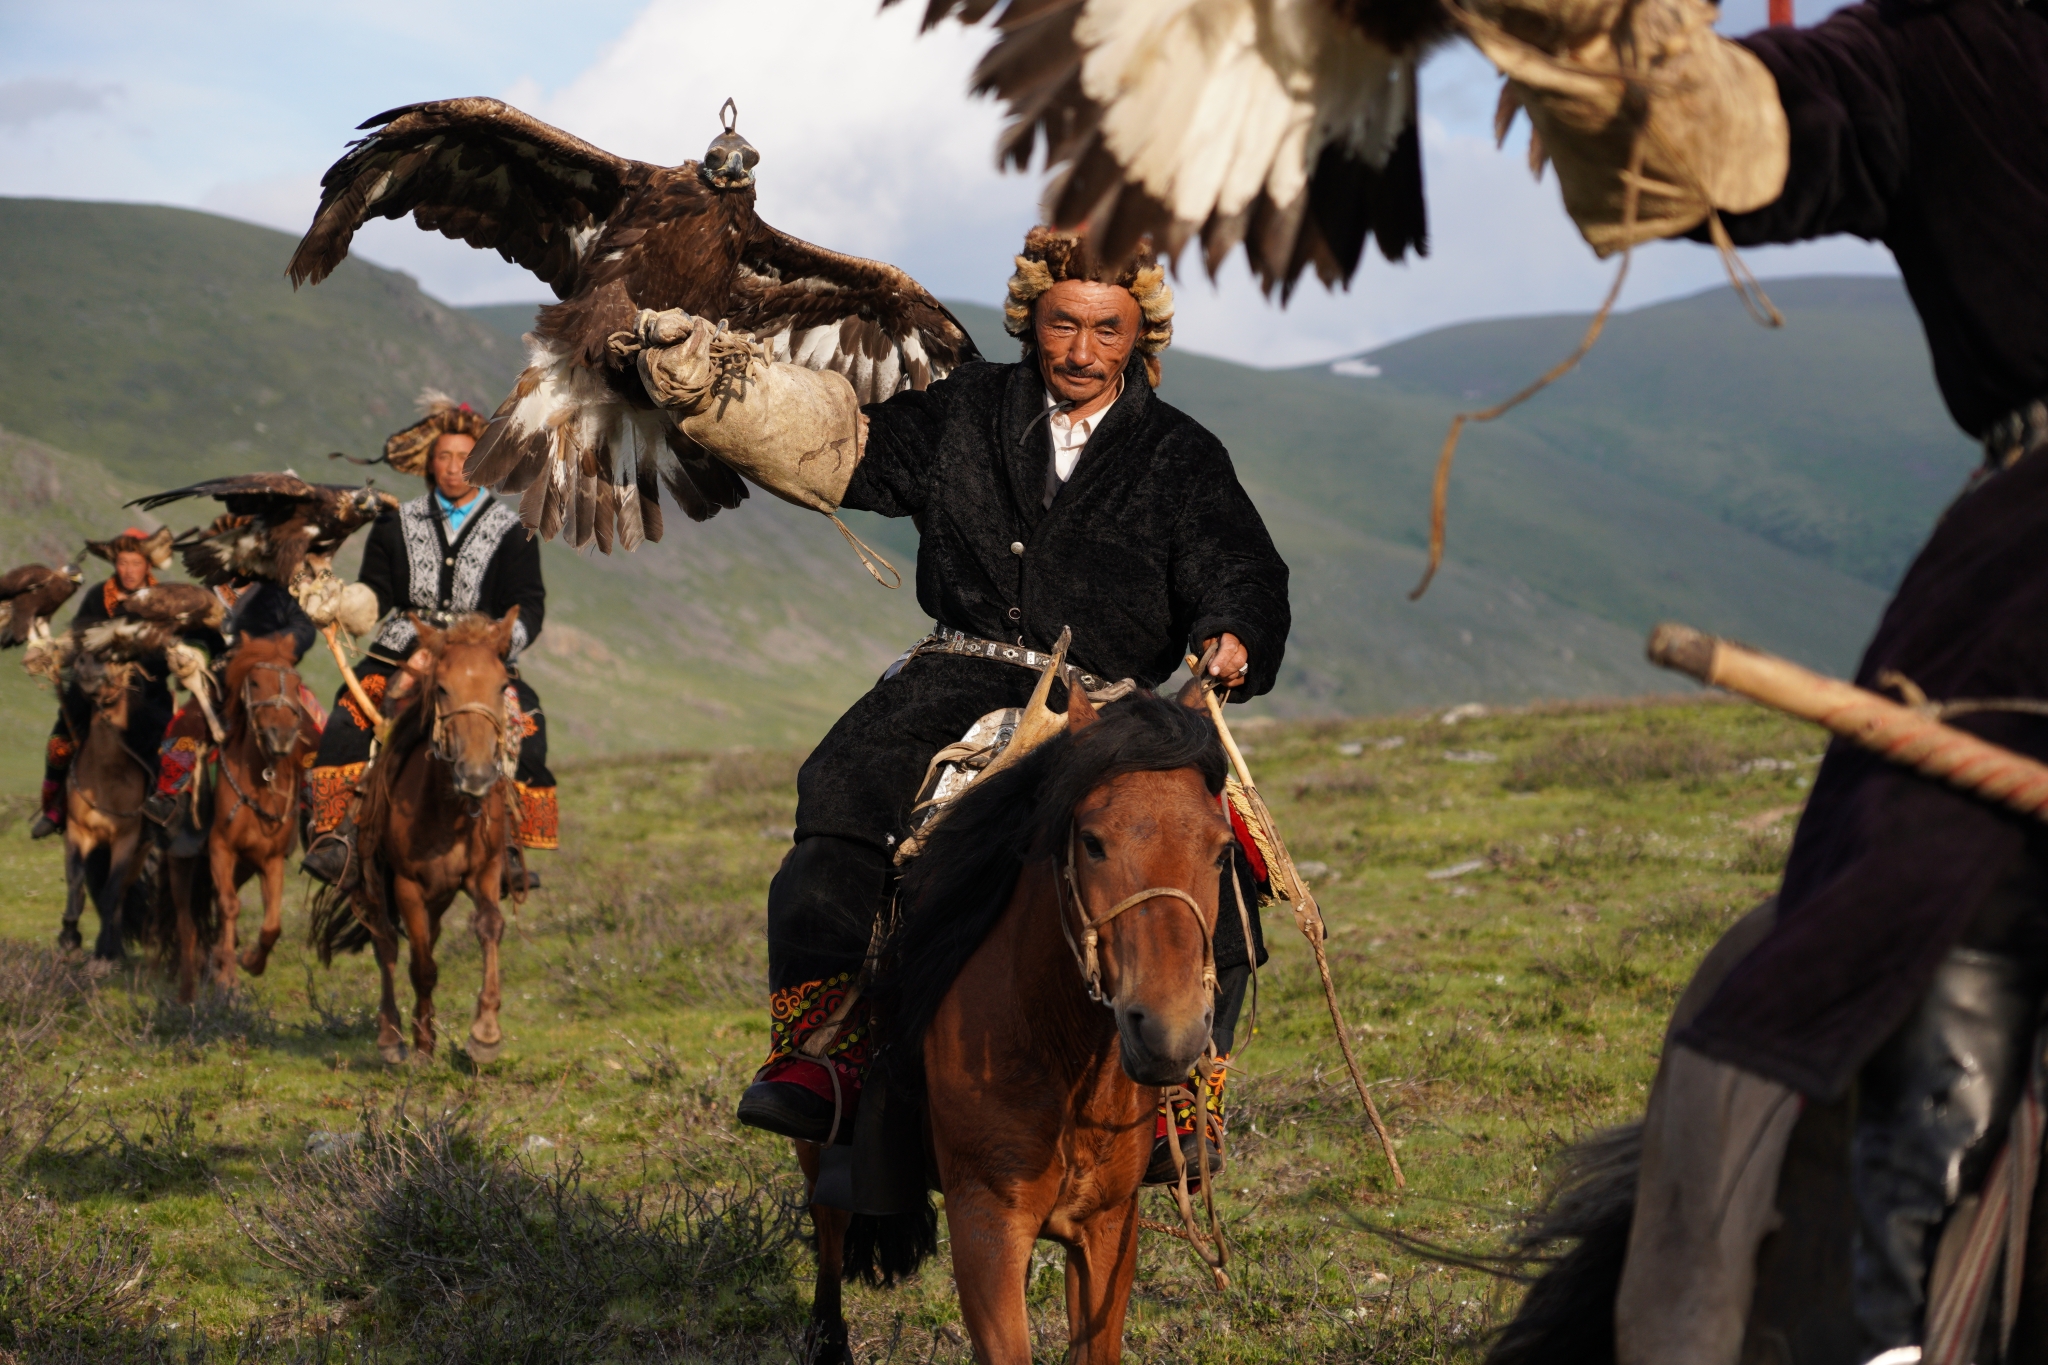 Horse riders crossing grassy, mountainous terrain with falcons on their aims